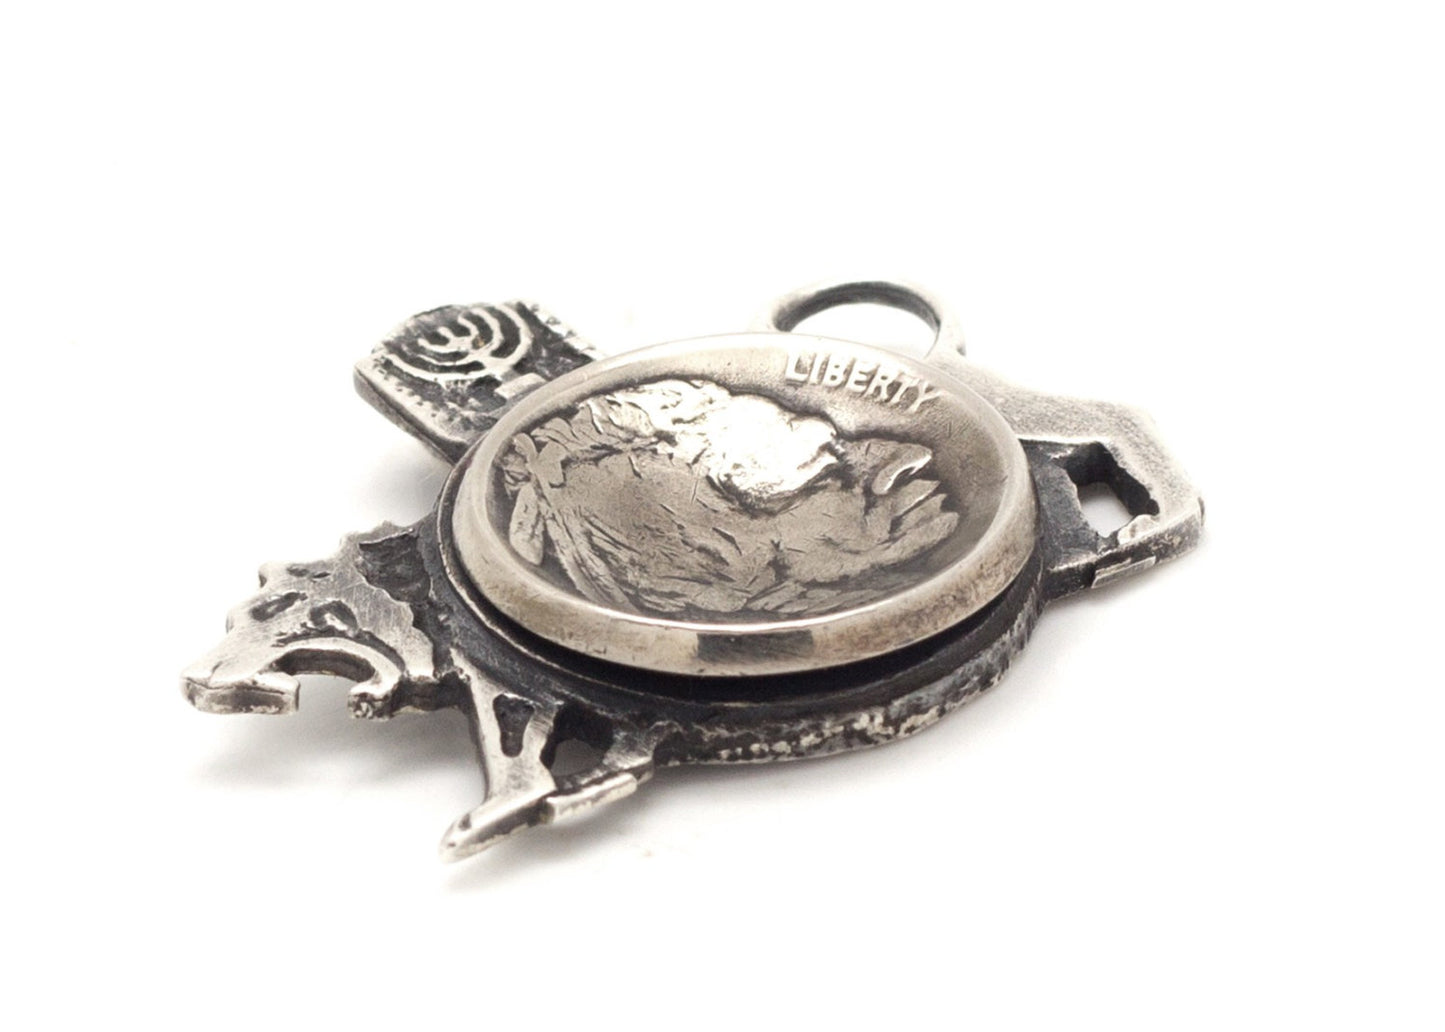 Coin pendent with the Buffalo Nickel coin of The USA